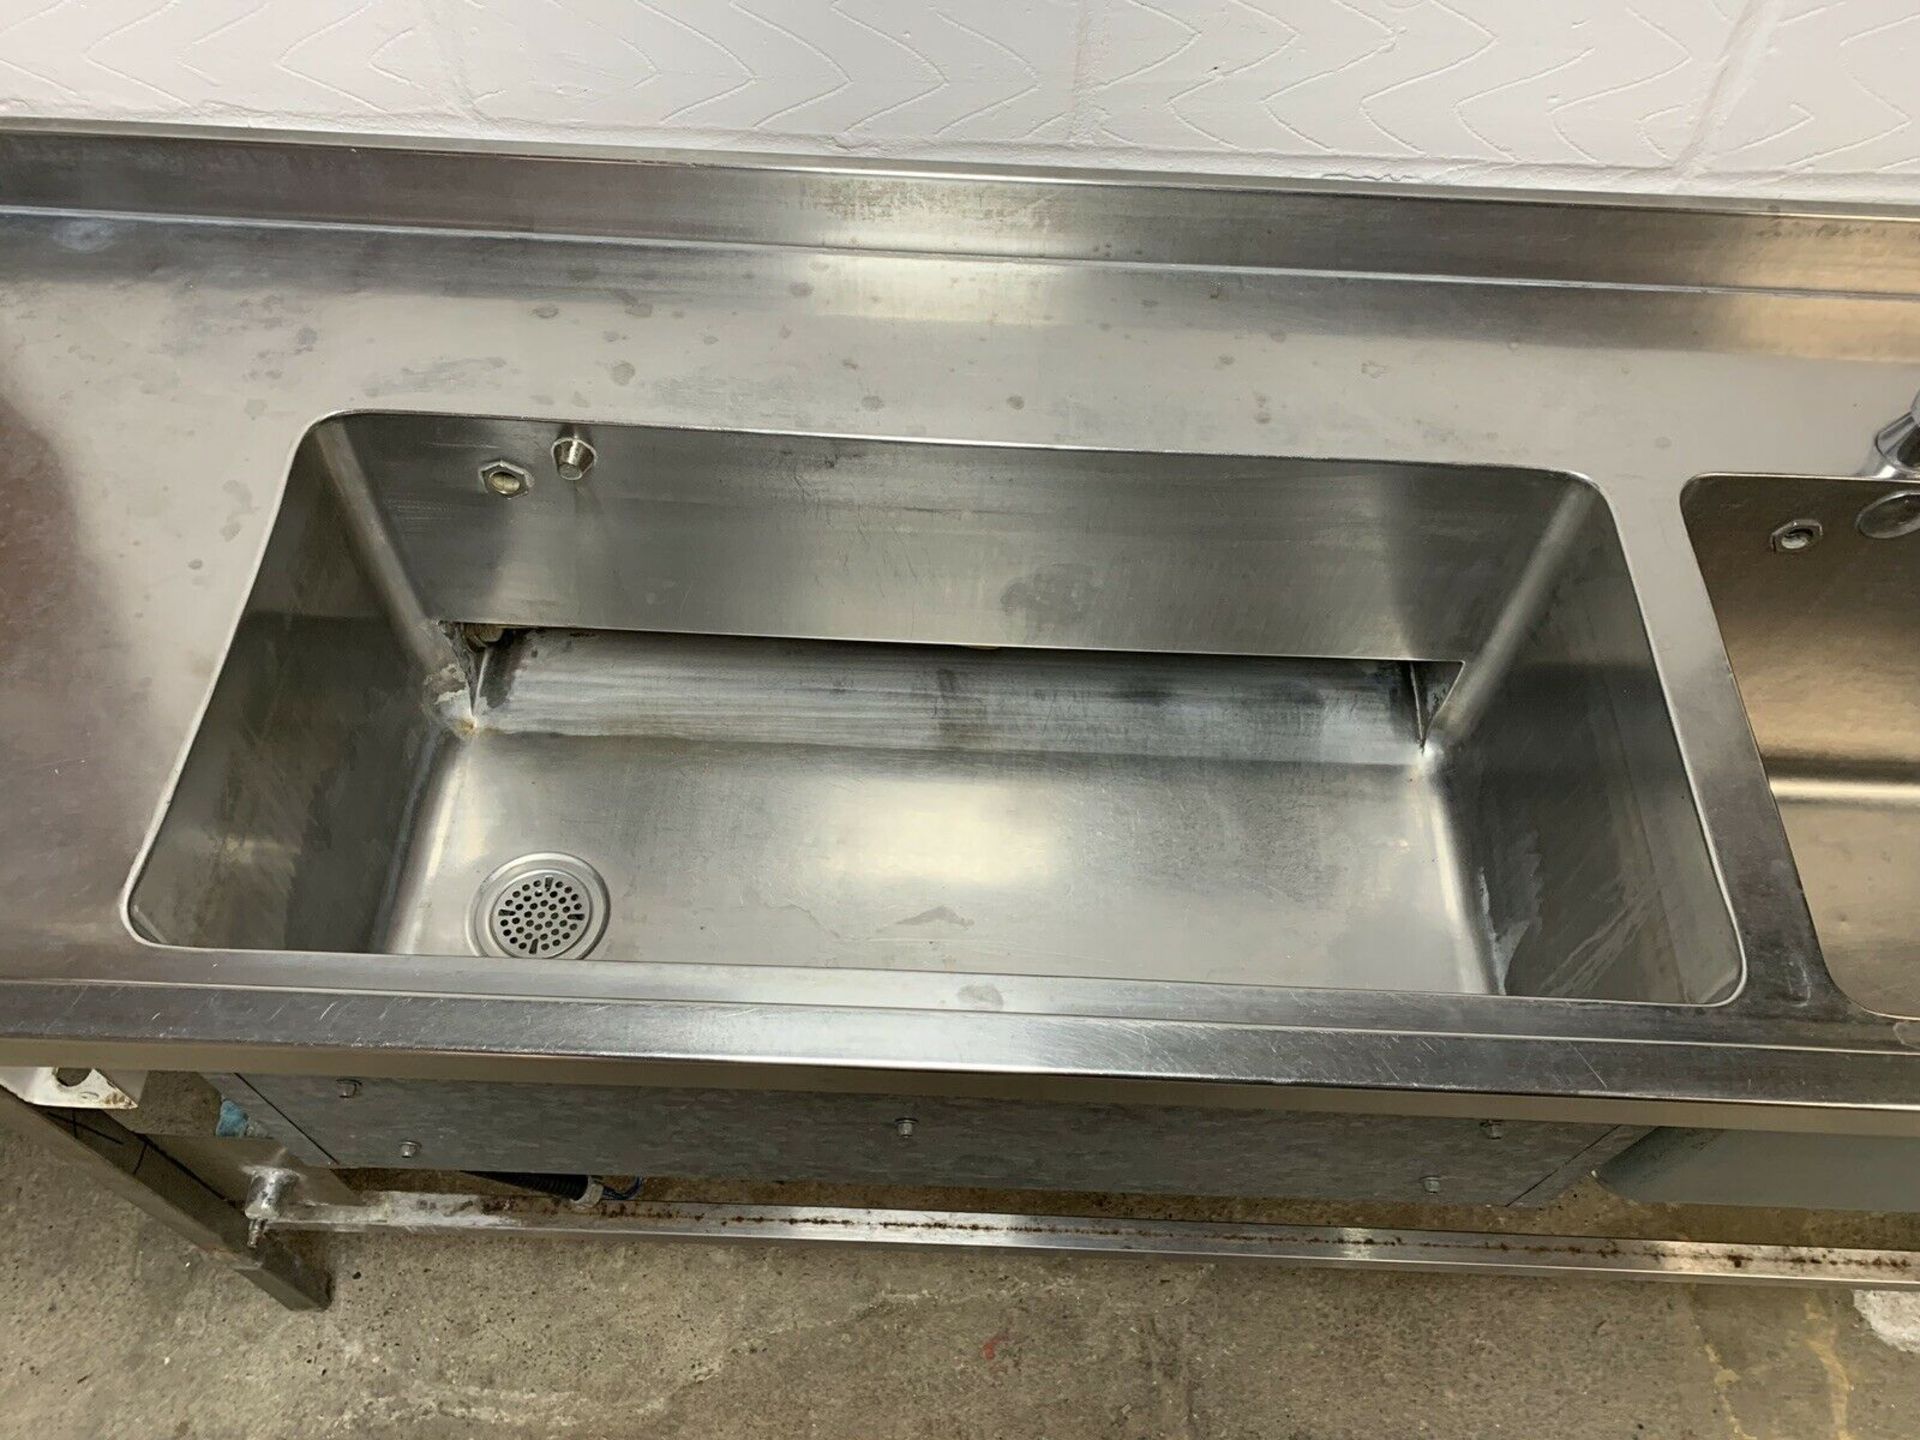 Stainless Steel Double Bowl Sink With Lefthand Drainer Taps and Upstand - Image 2 of 4